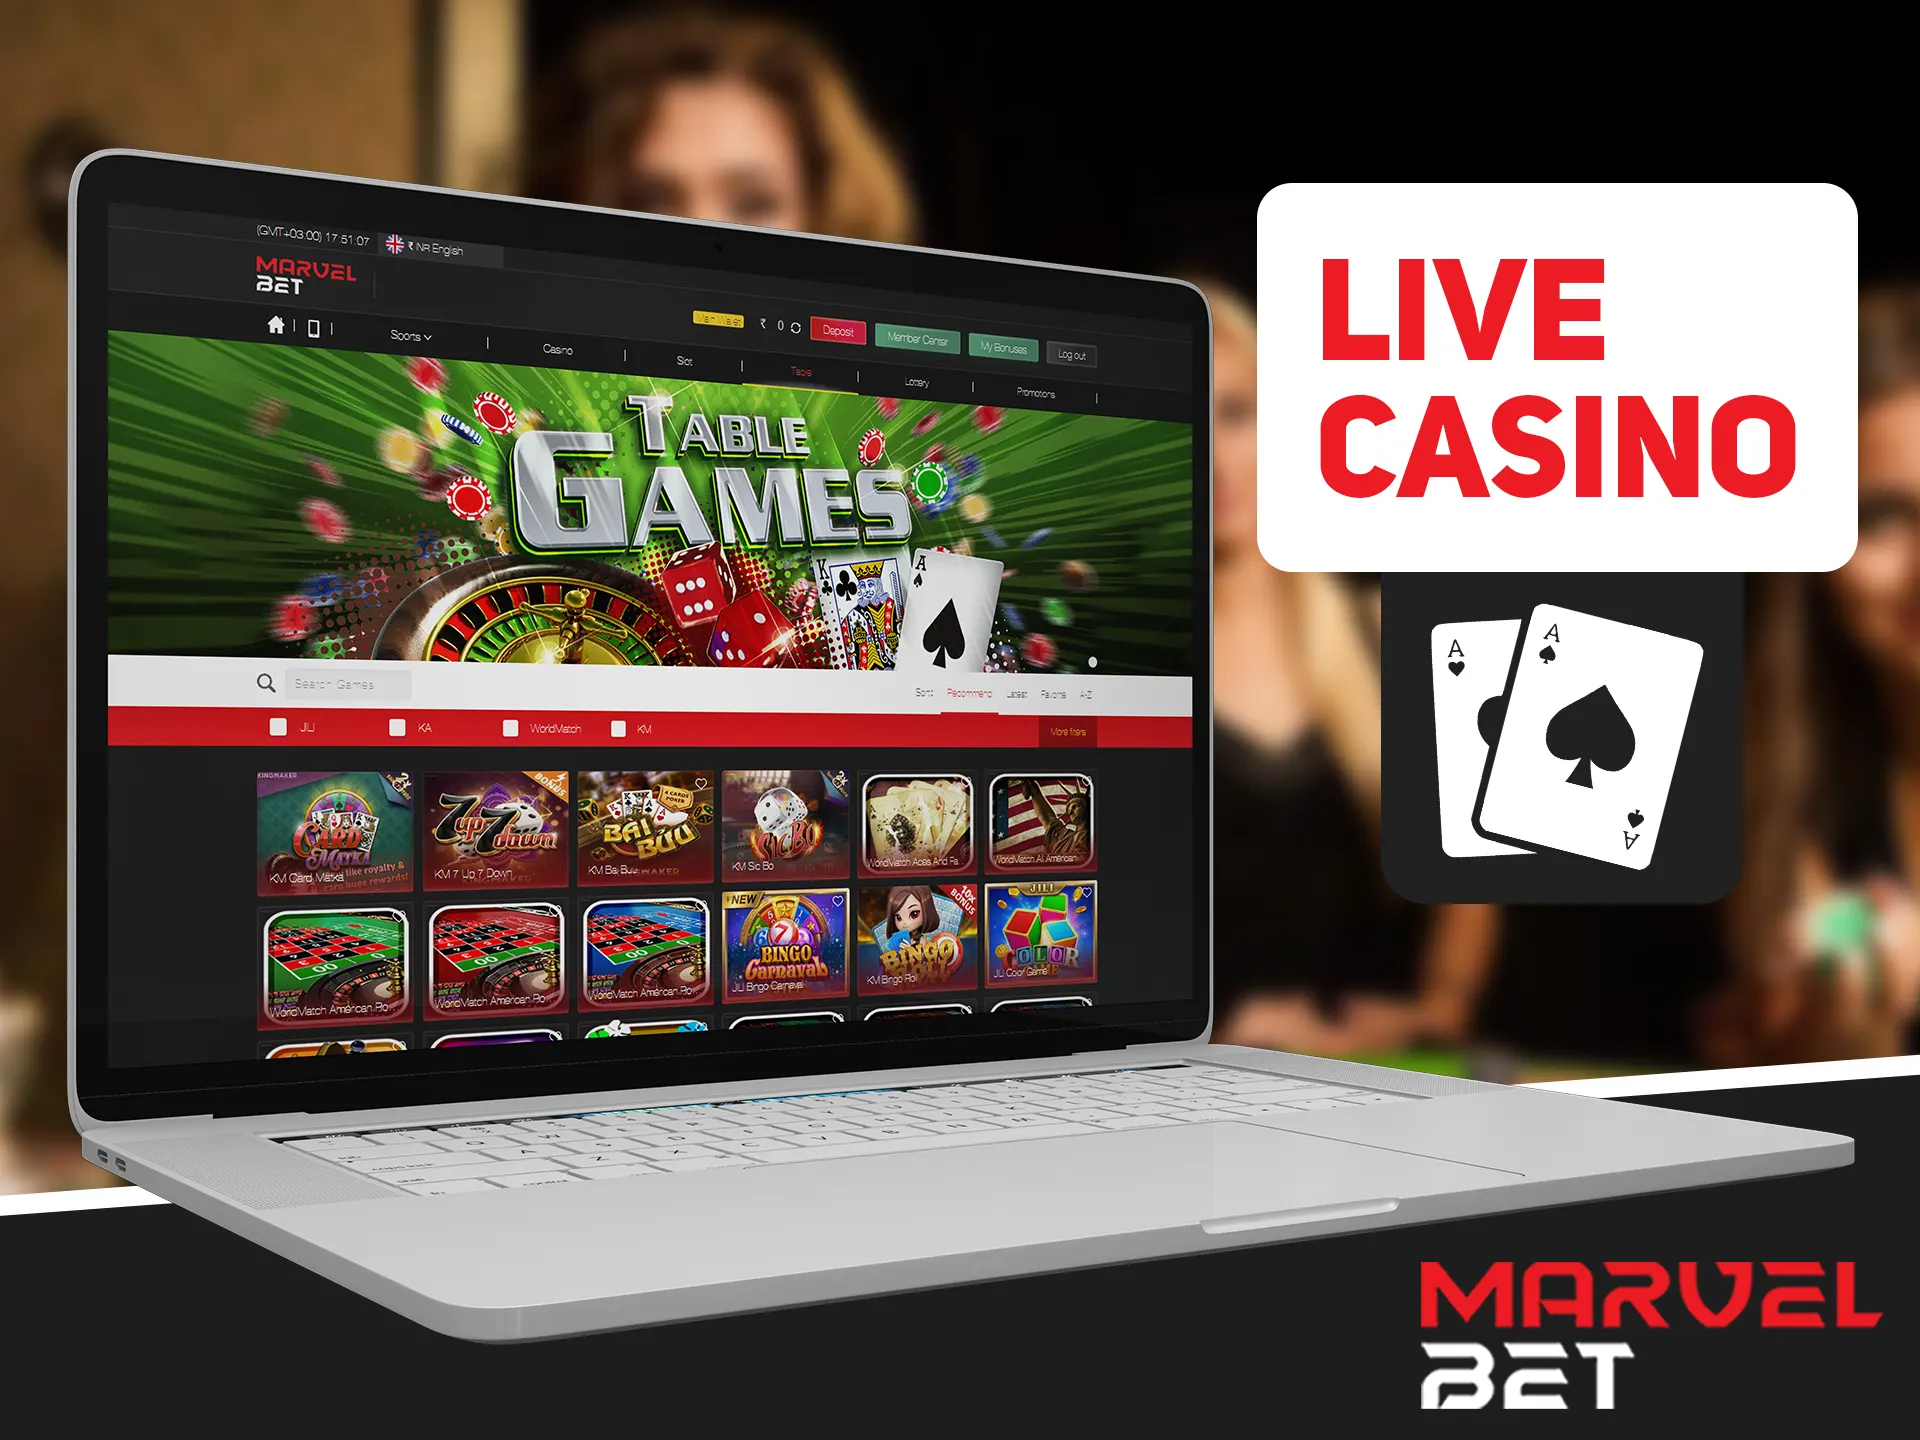 Play casino games at Marvelbet with real people.